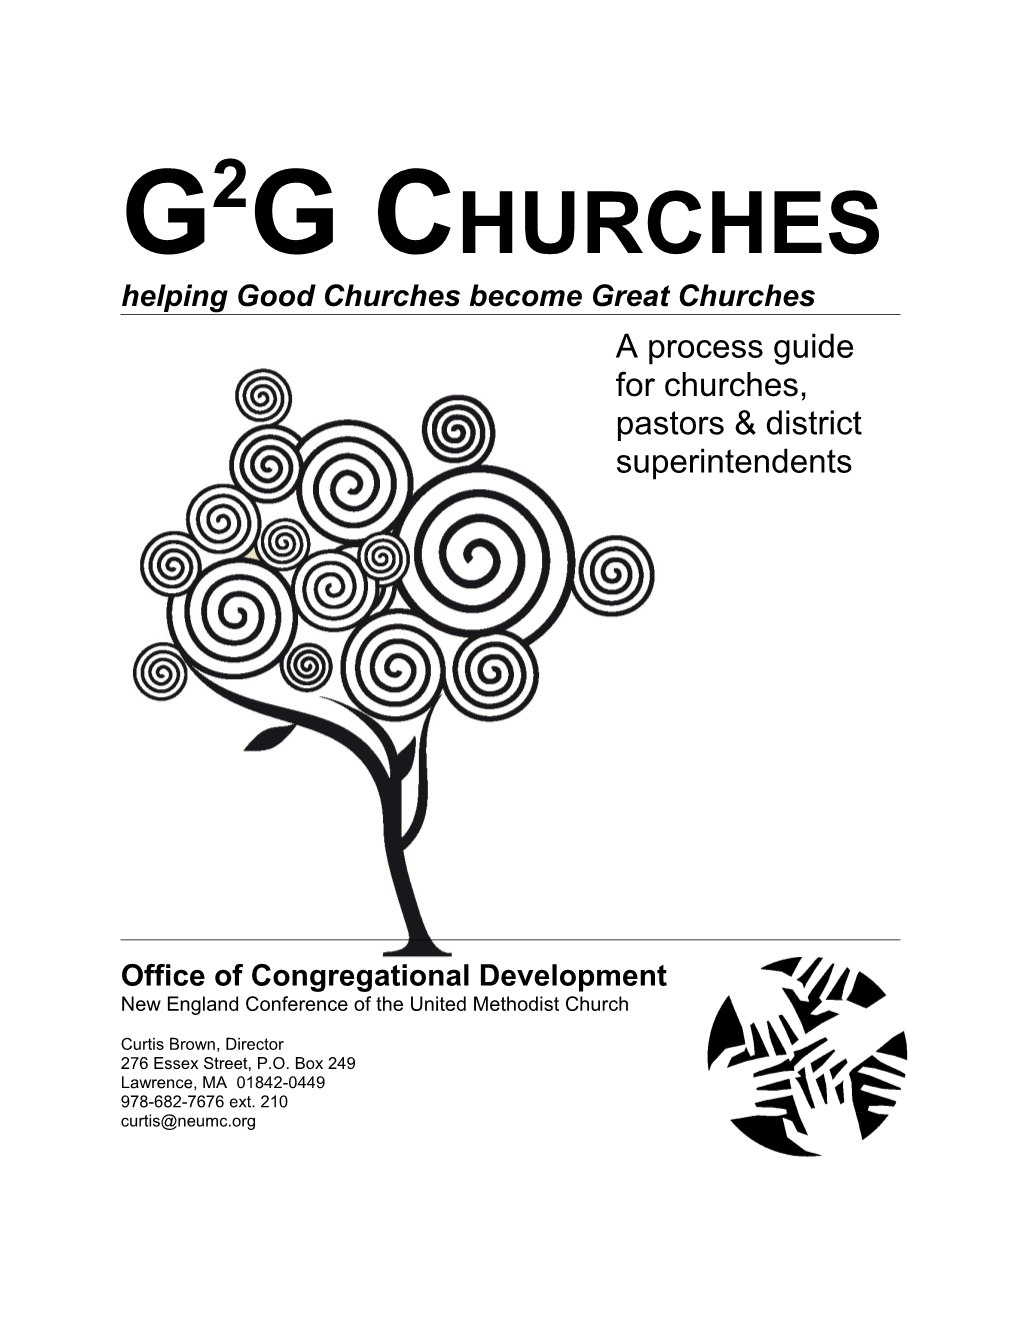 Helping Good Churches Become Great Churches